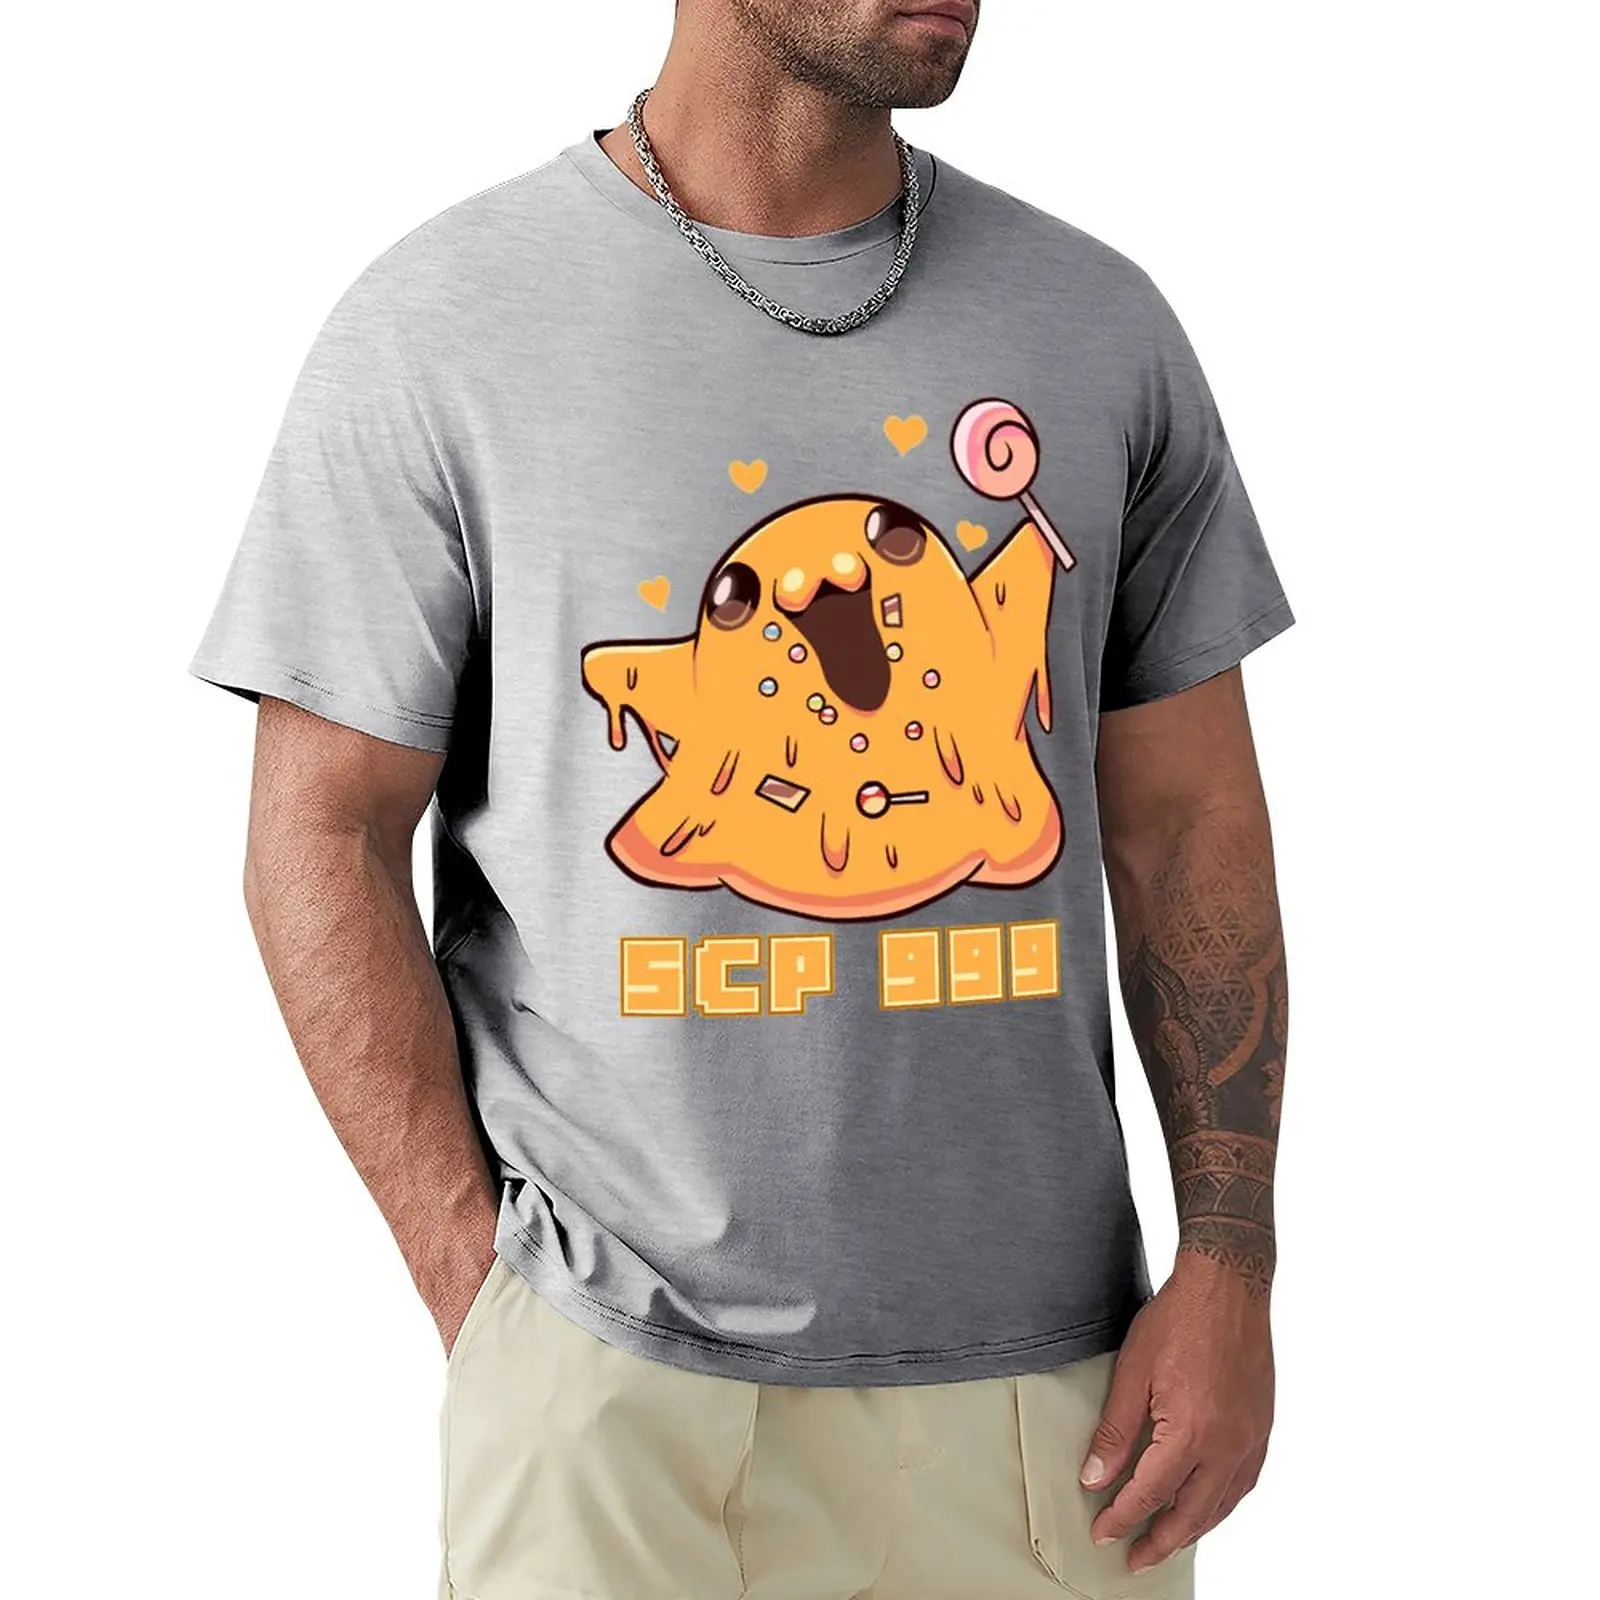 SCP-999 The Tickle Monster SCP Foundation Long Sleeve T-Shirt